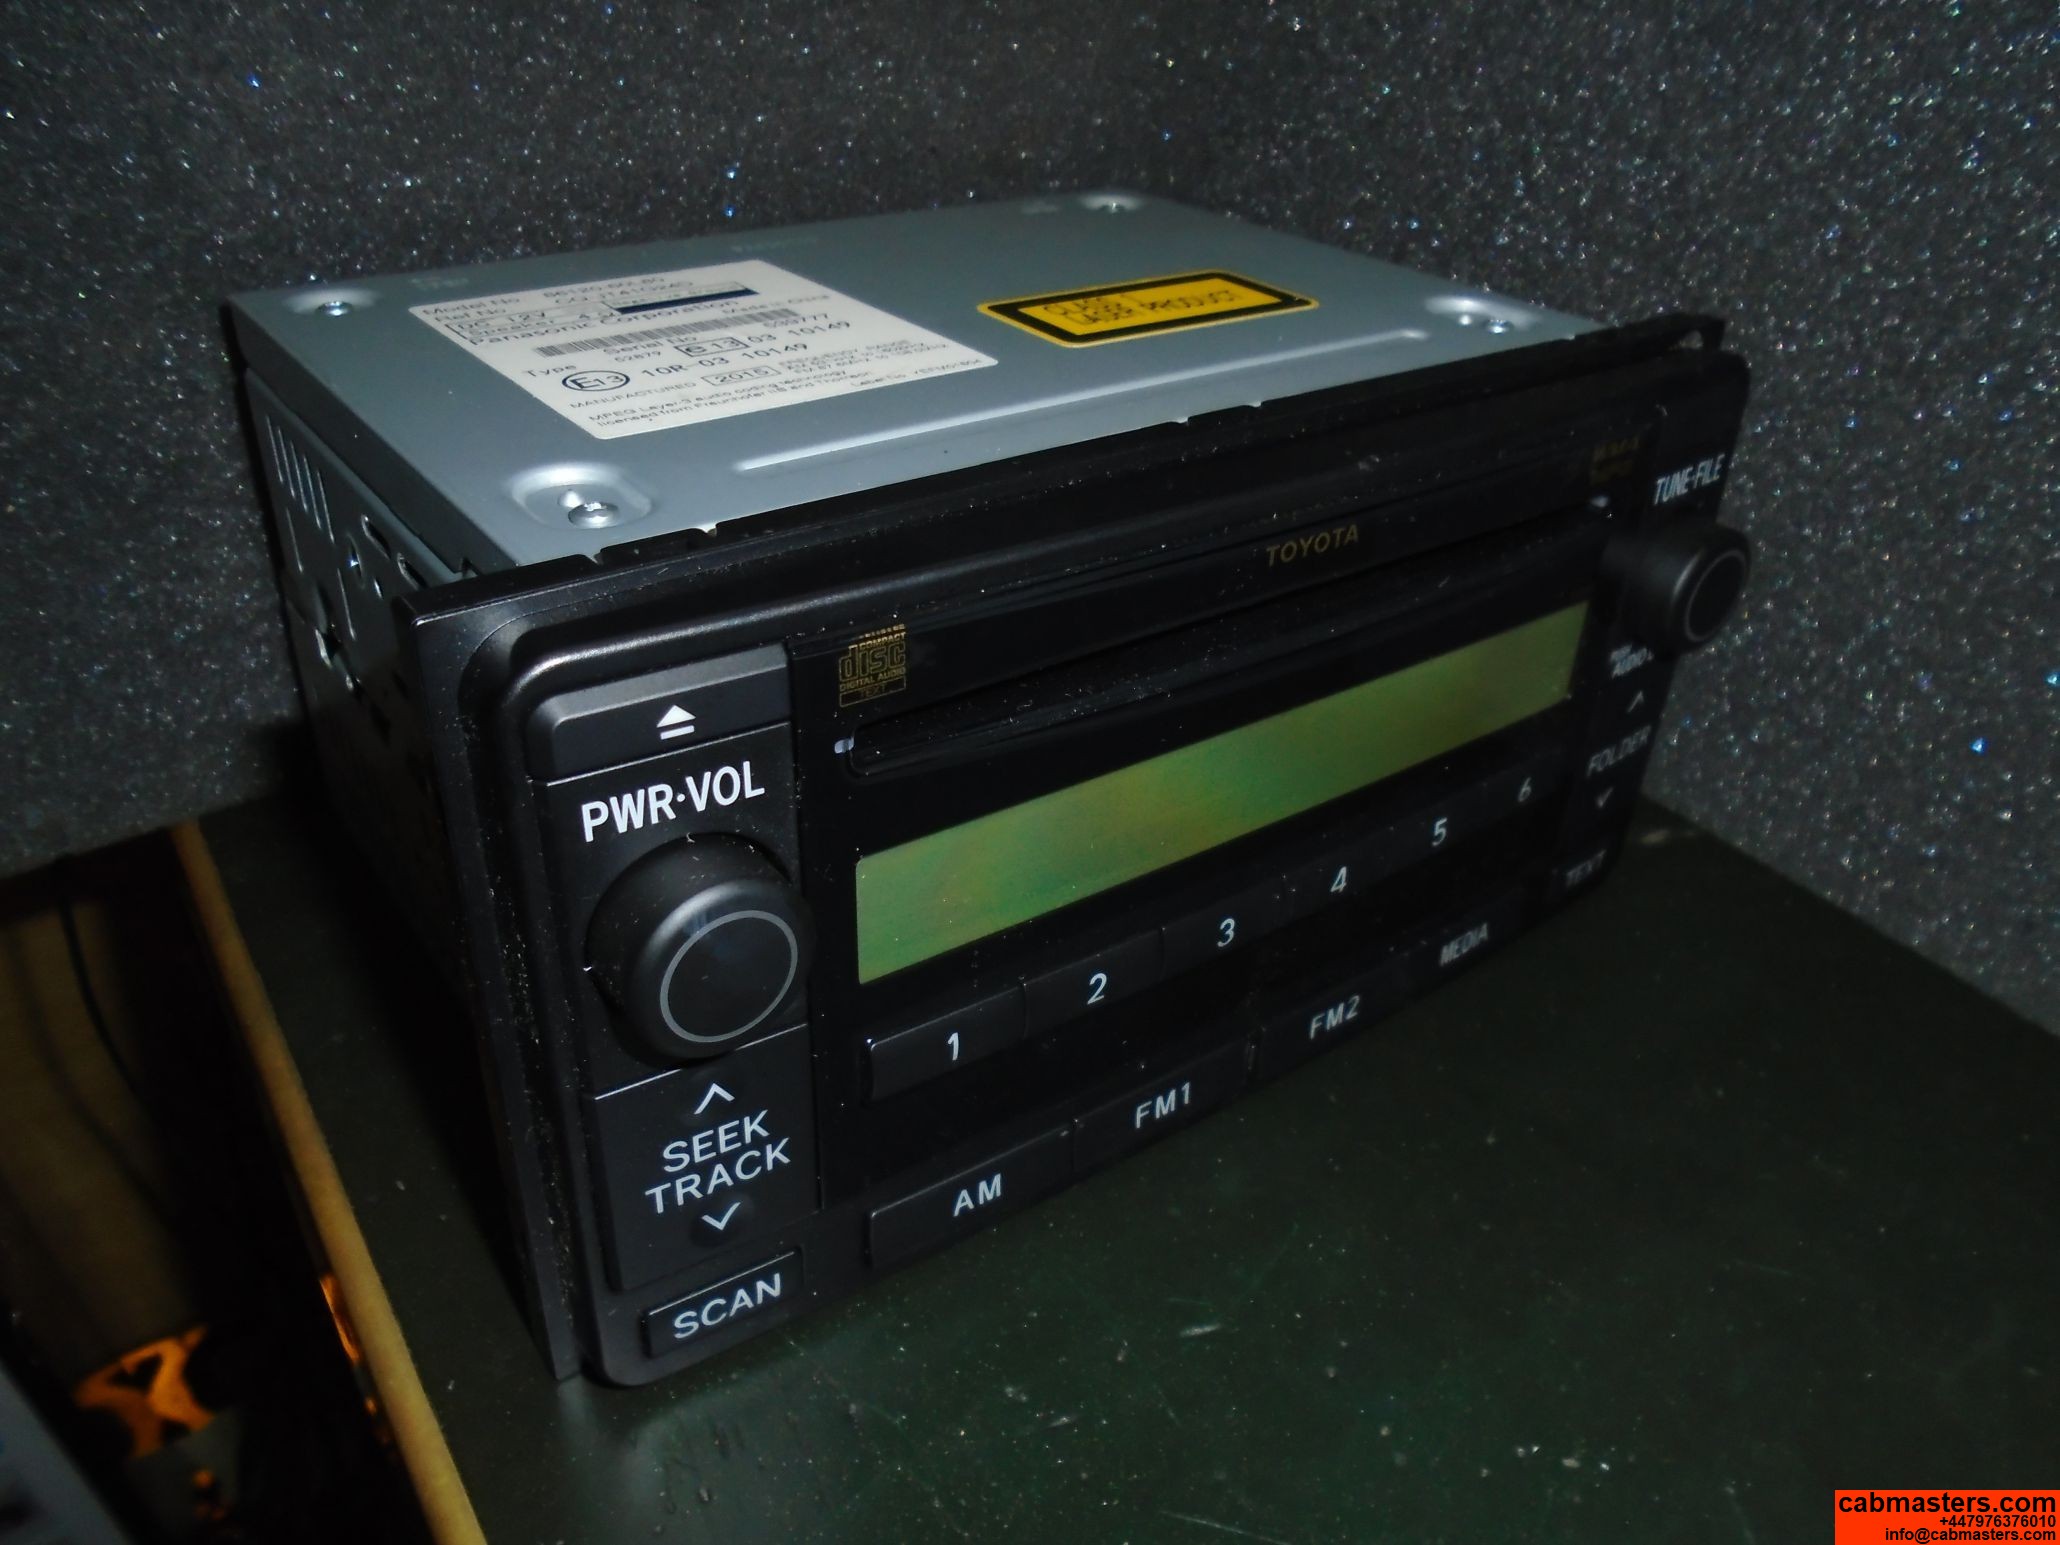 Toyota CD Head Unit - Panasonic for sale at Cabmasters.com